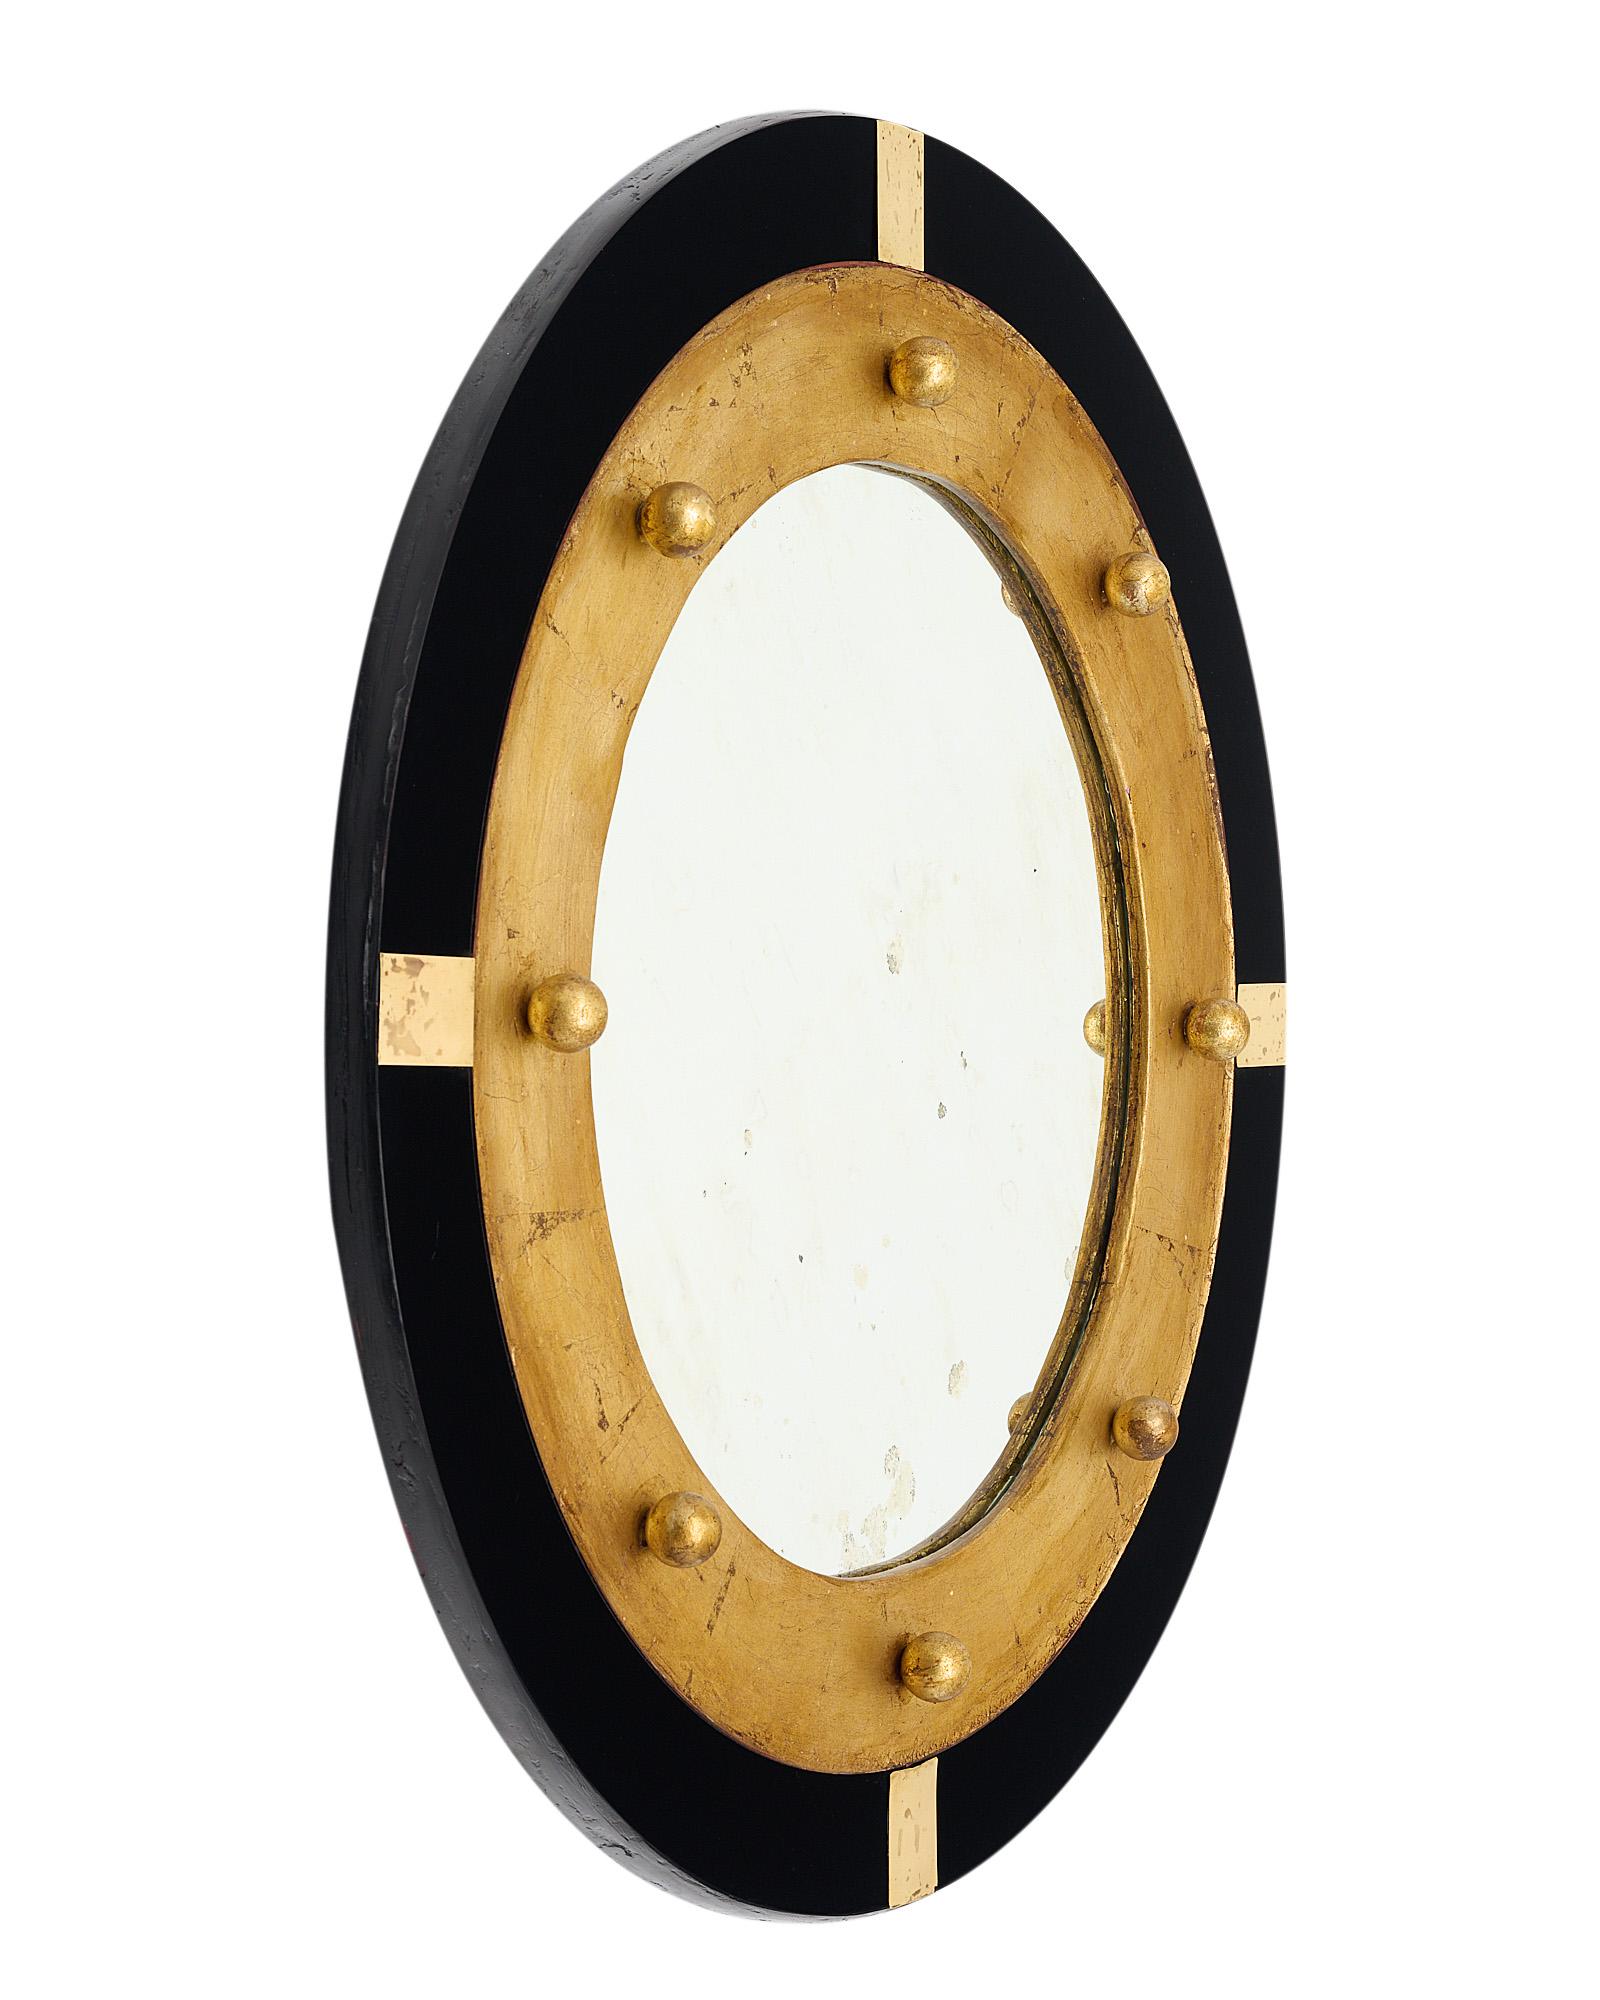 Vintage Spanish mirror with a circular central mirror and a wooden structure. This piece features gold leafing and a beautiful patina. It is framed with black glass and enhanced with small spheric gold finials and brass elements.